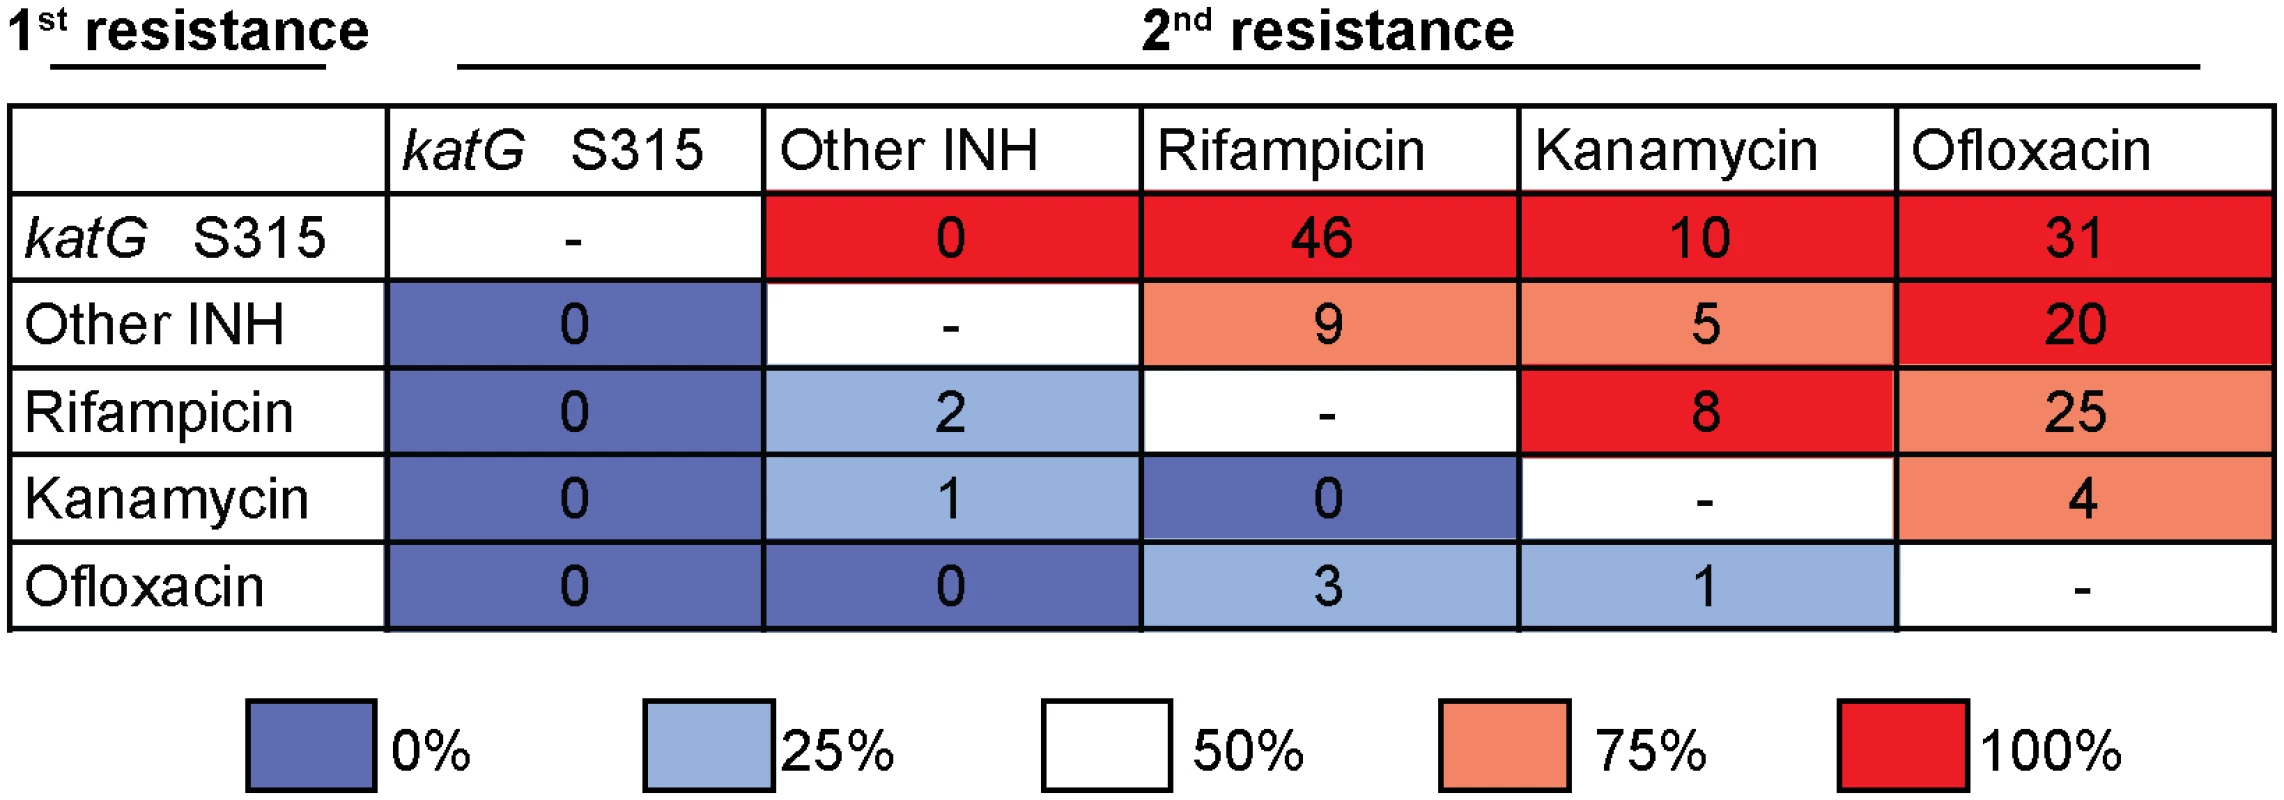 Isoniazid resistance is the first step towards drug resistance.